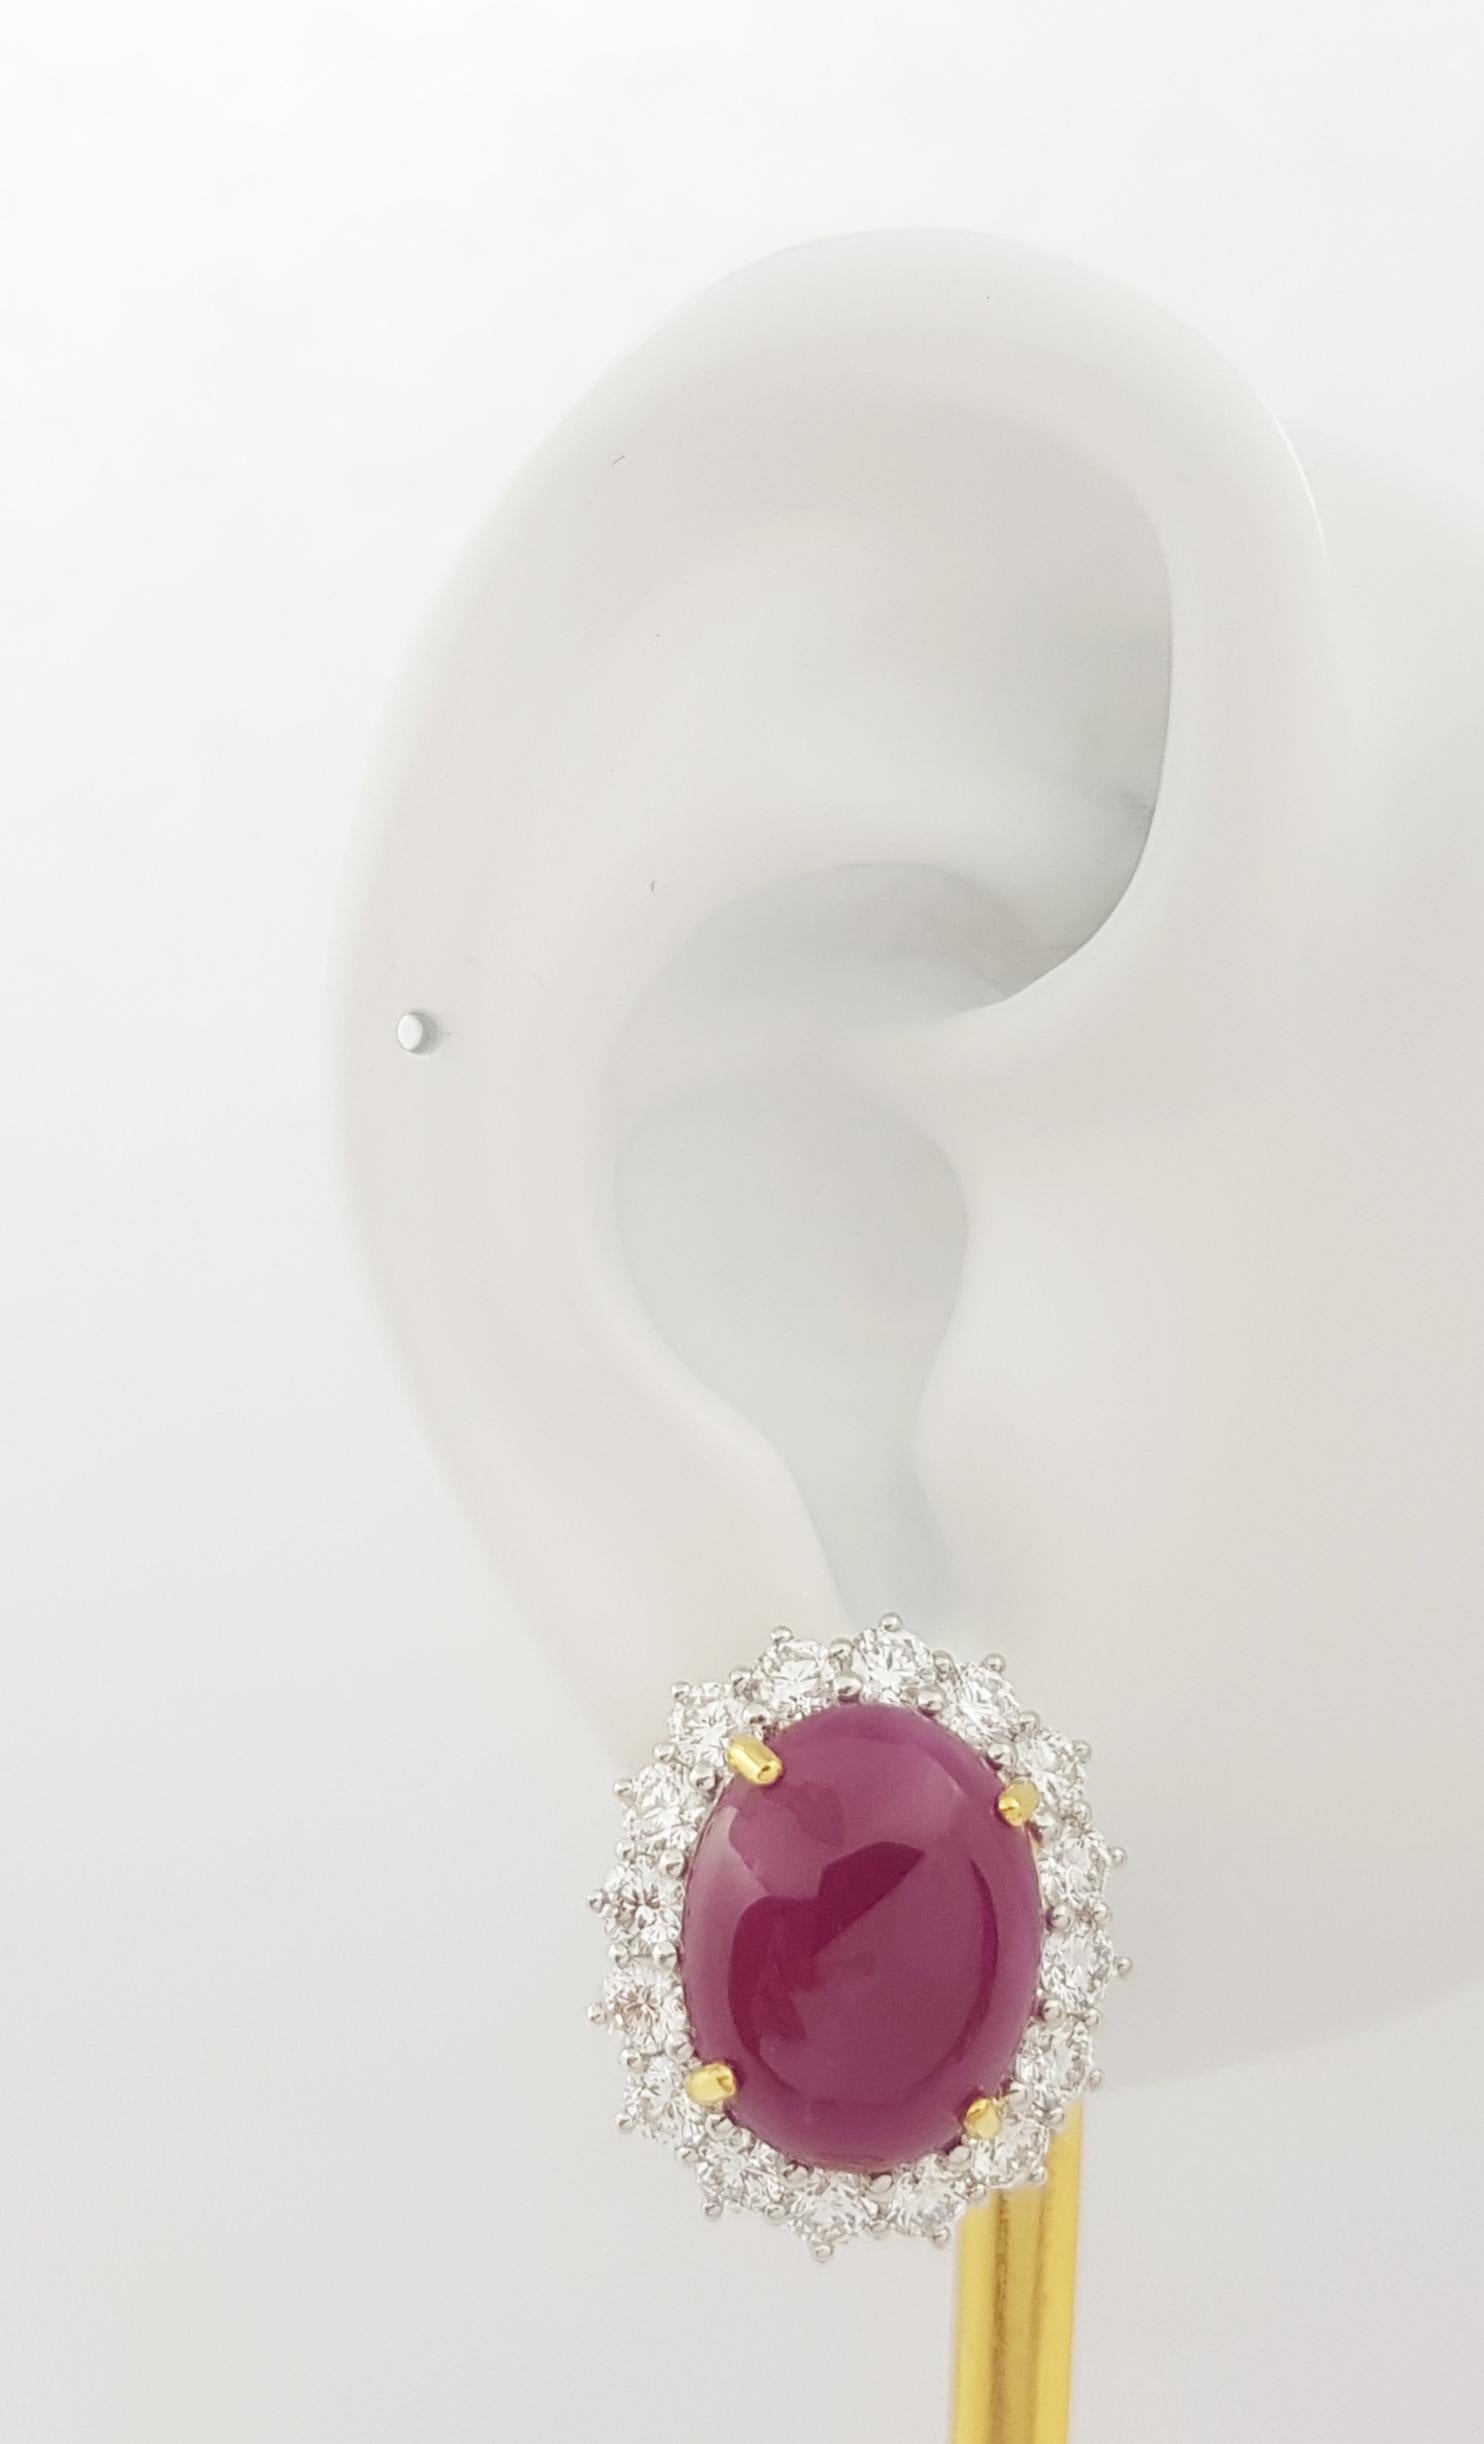 Cabochon Ruby 16.30 carats with Diamond 3.76 carats Earrings set in 18K Yellow/White Gold Settings

Width: 1.8 cm 
Length: 2.1 cm
Total Weight: 15.93 grams

